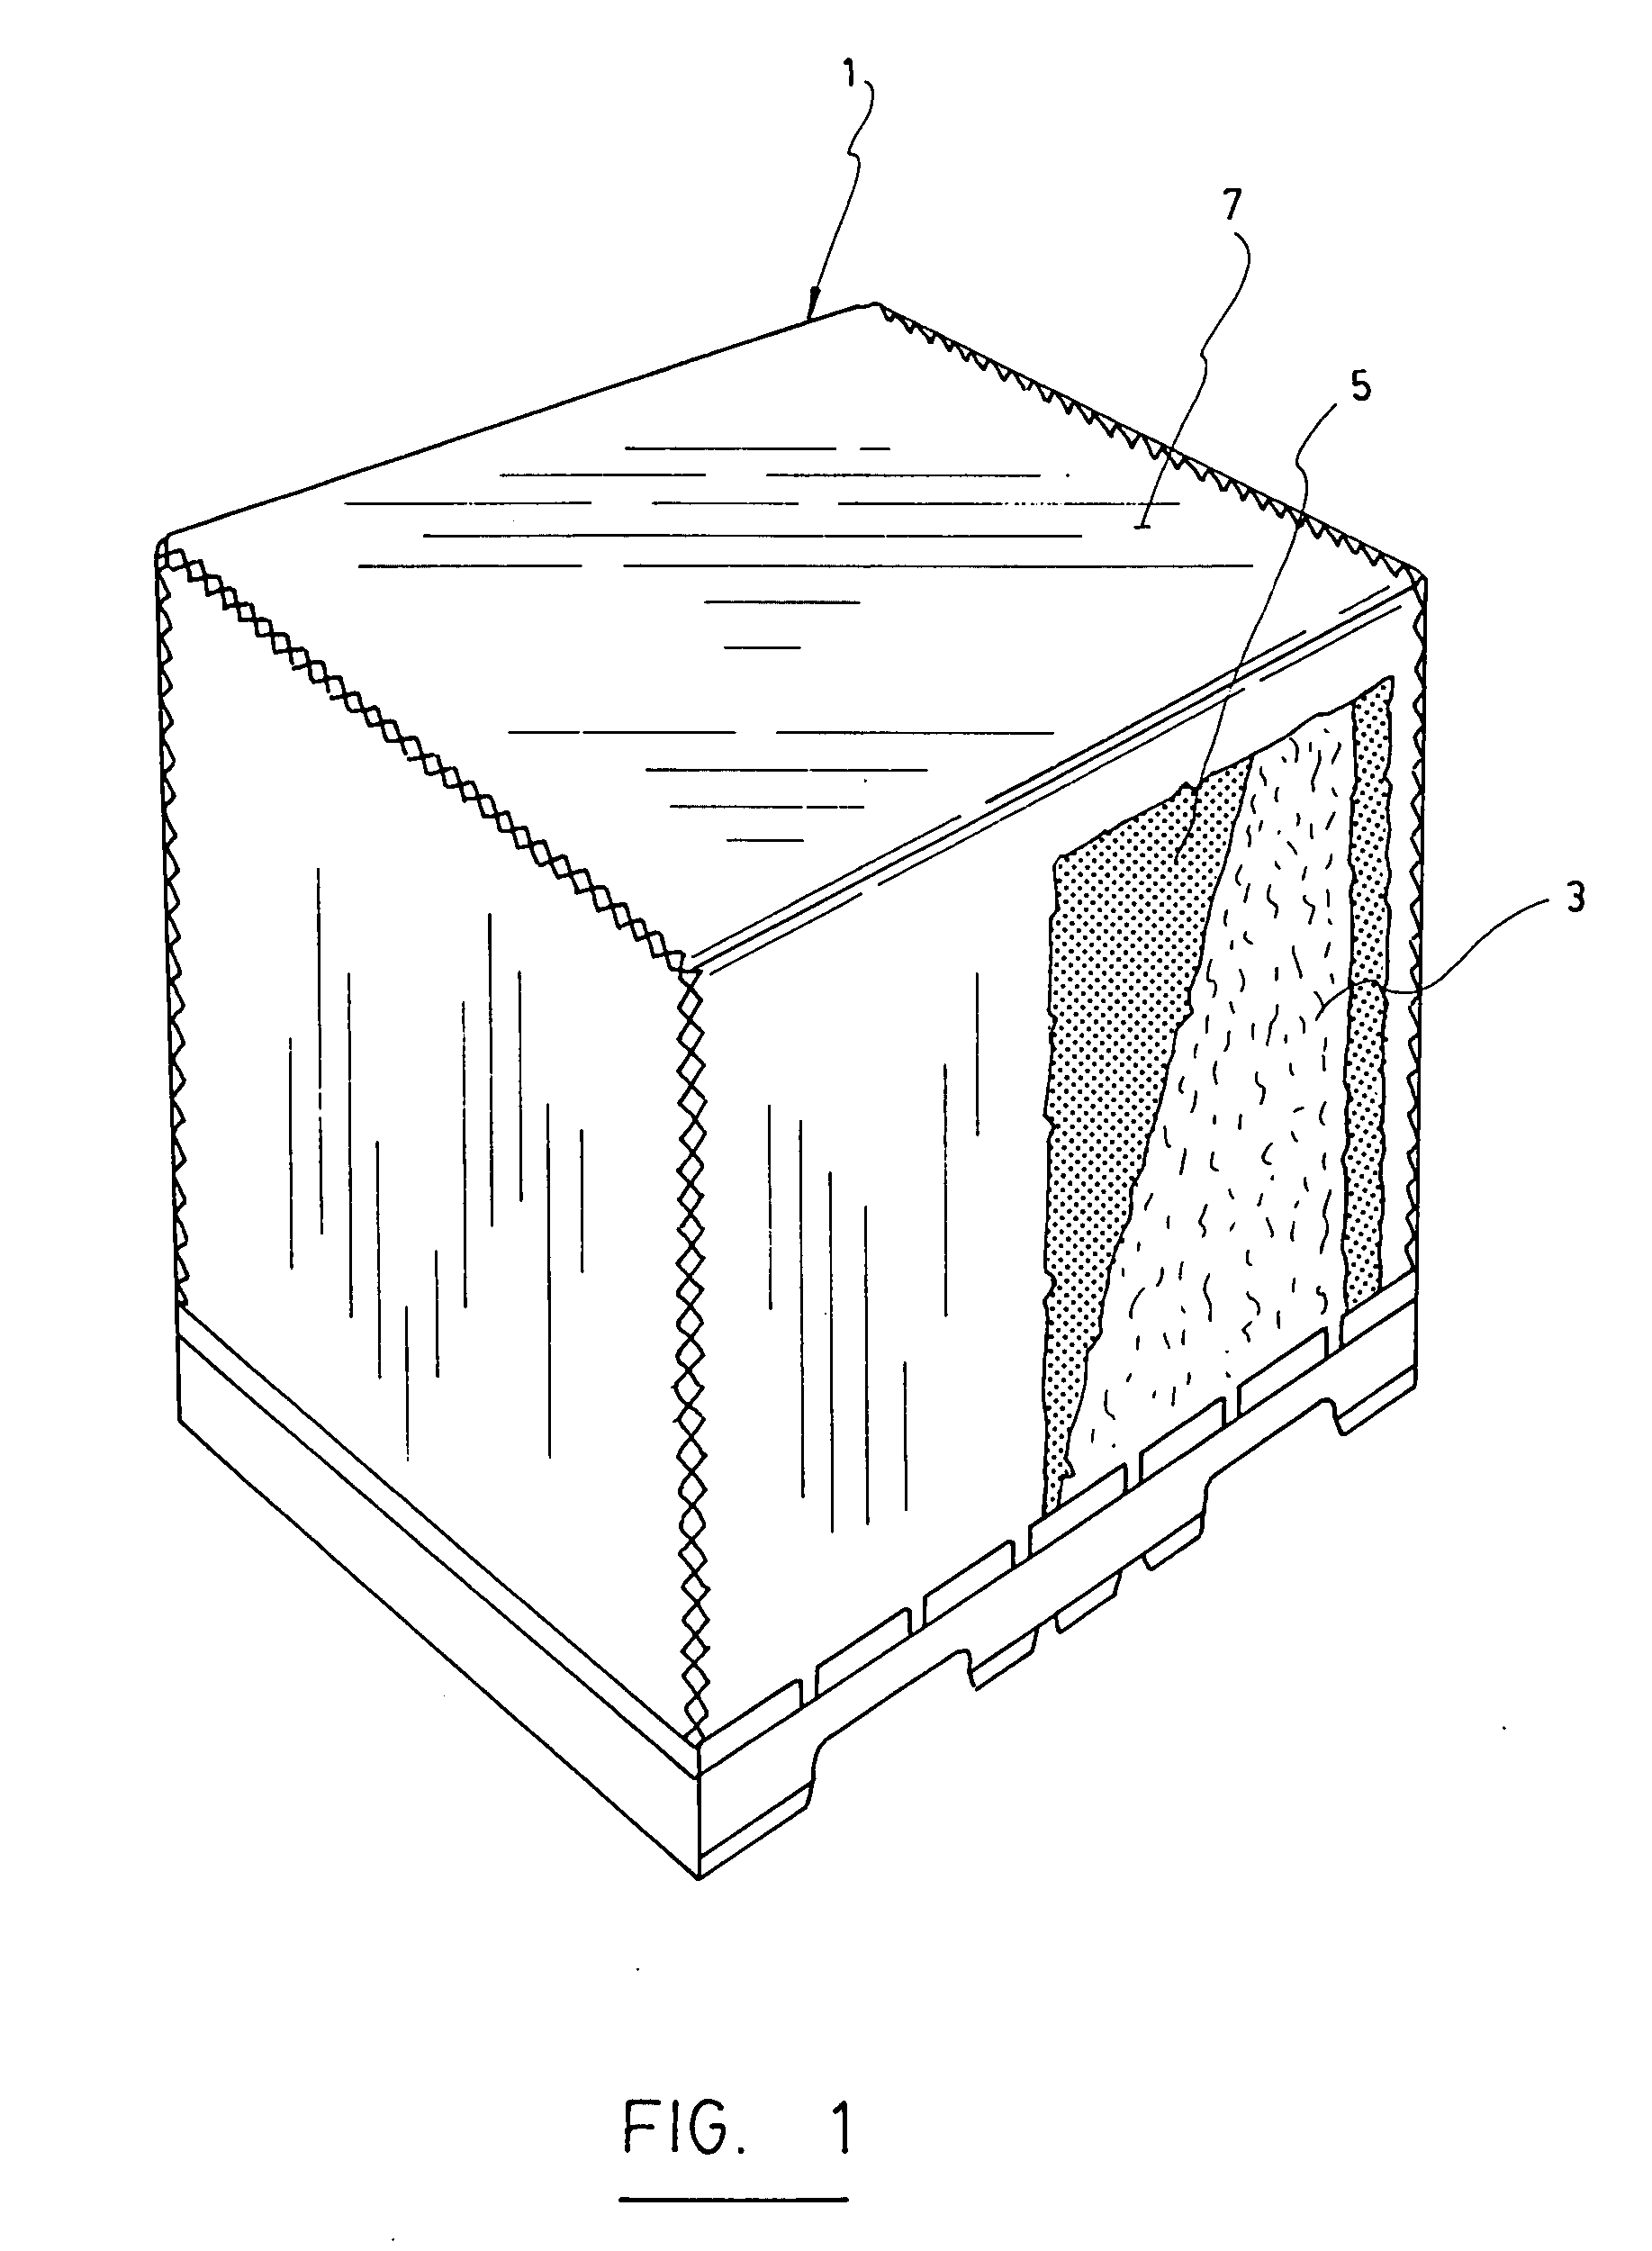 Cover for deflecting light and minimizing heat absorption by a body